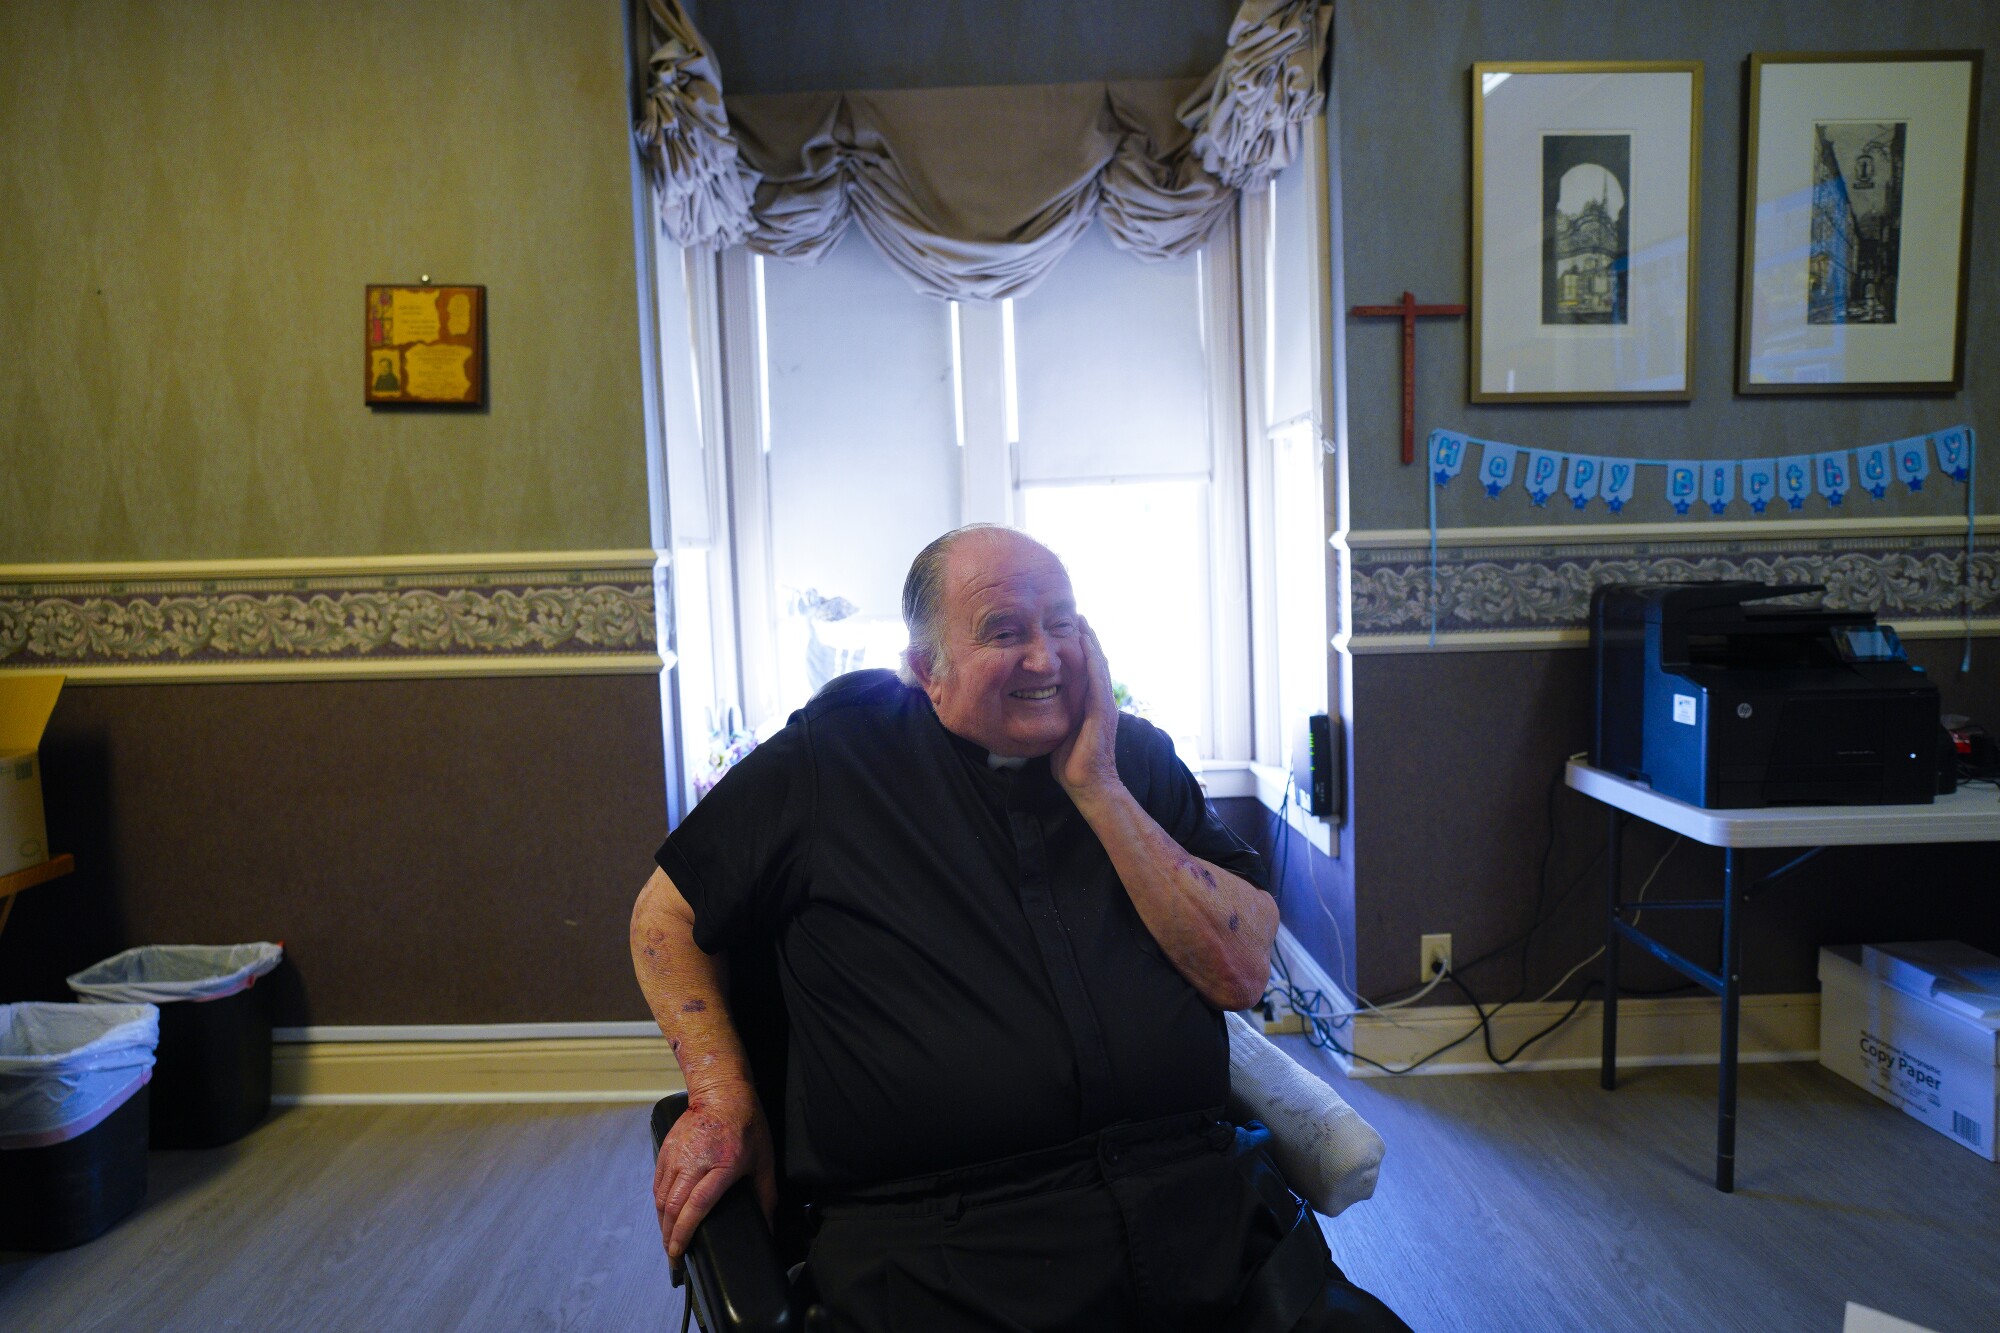 Father Joe Carroll sits in a chair in a room while holding his hand to his face